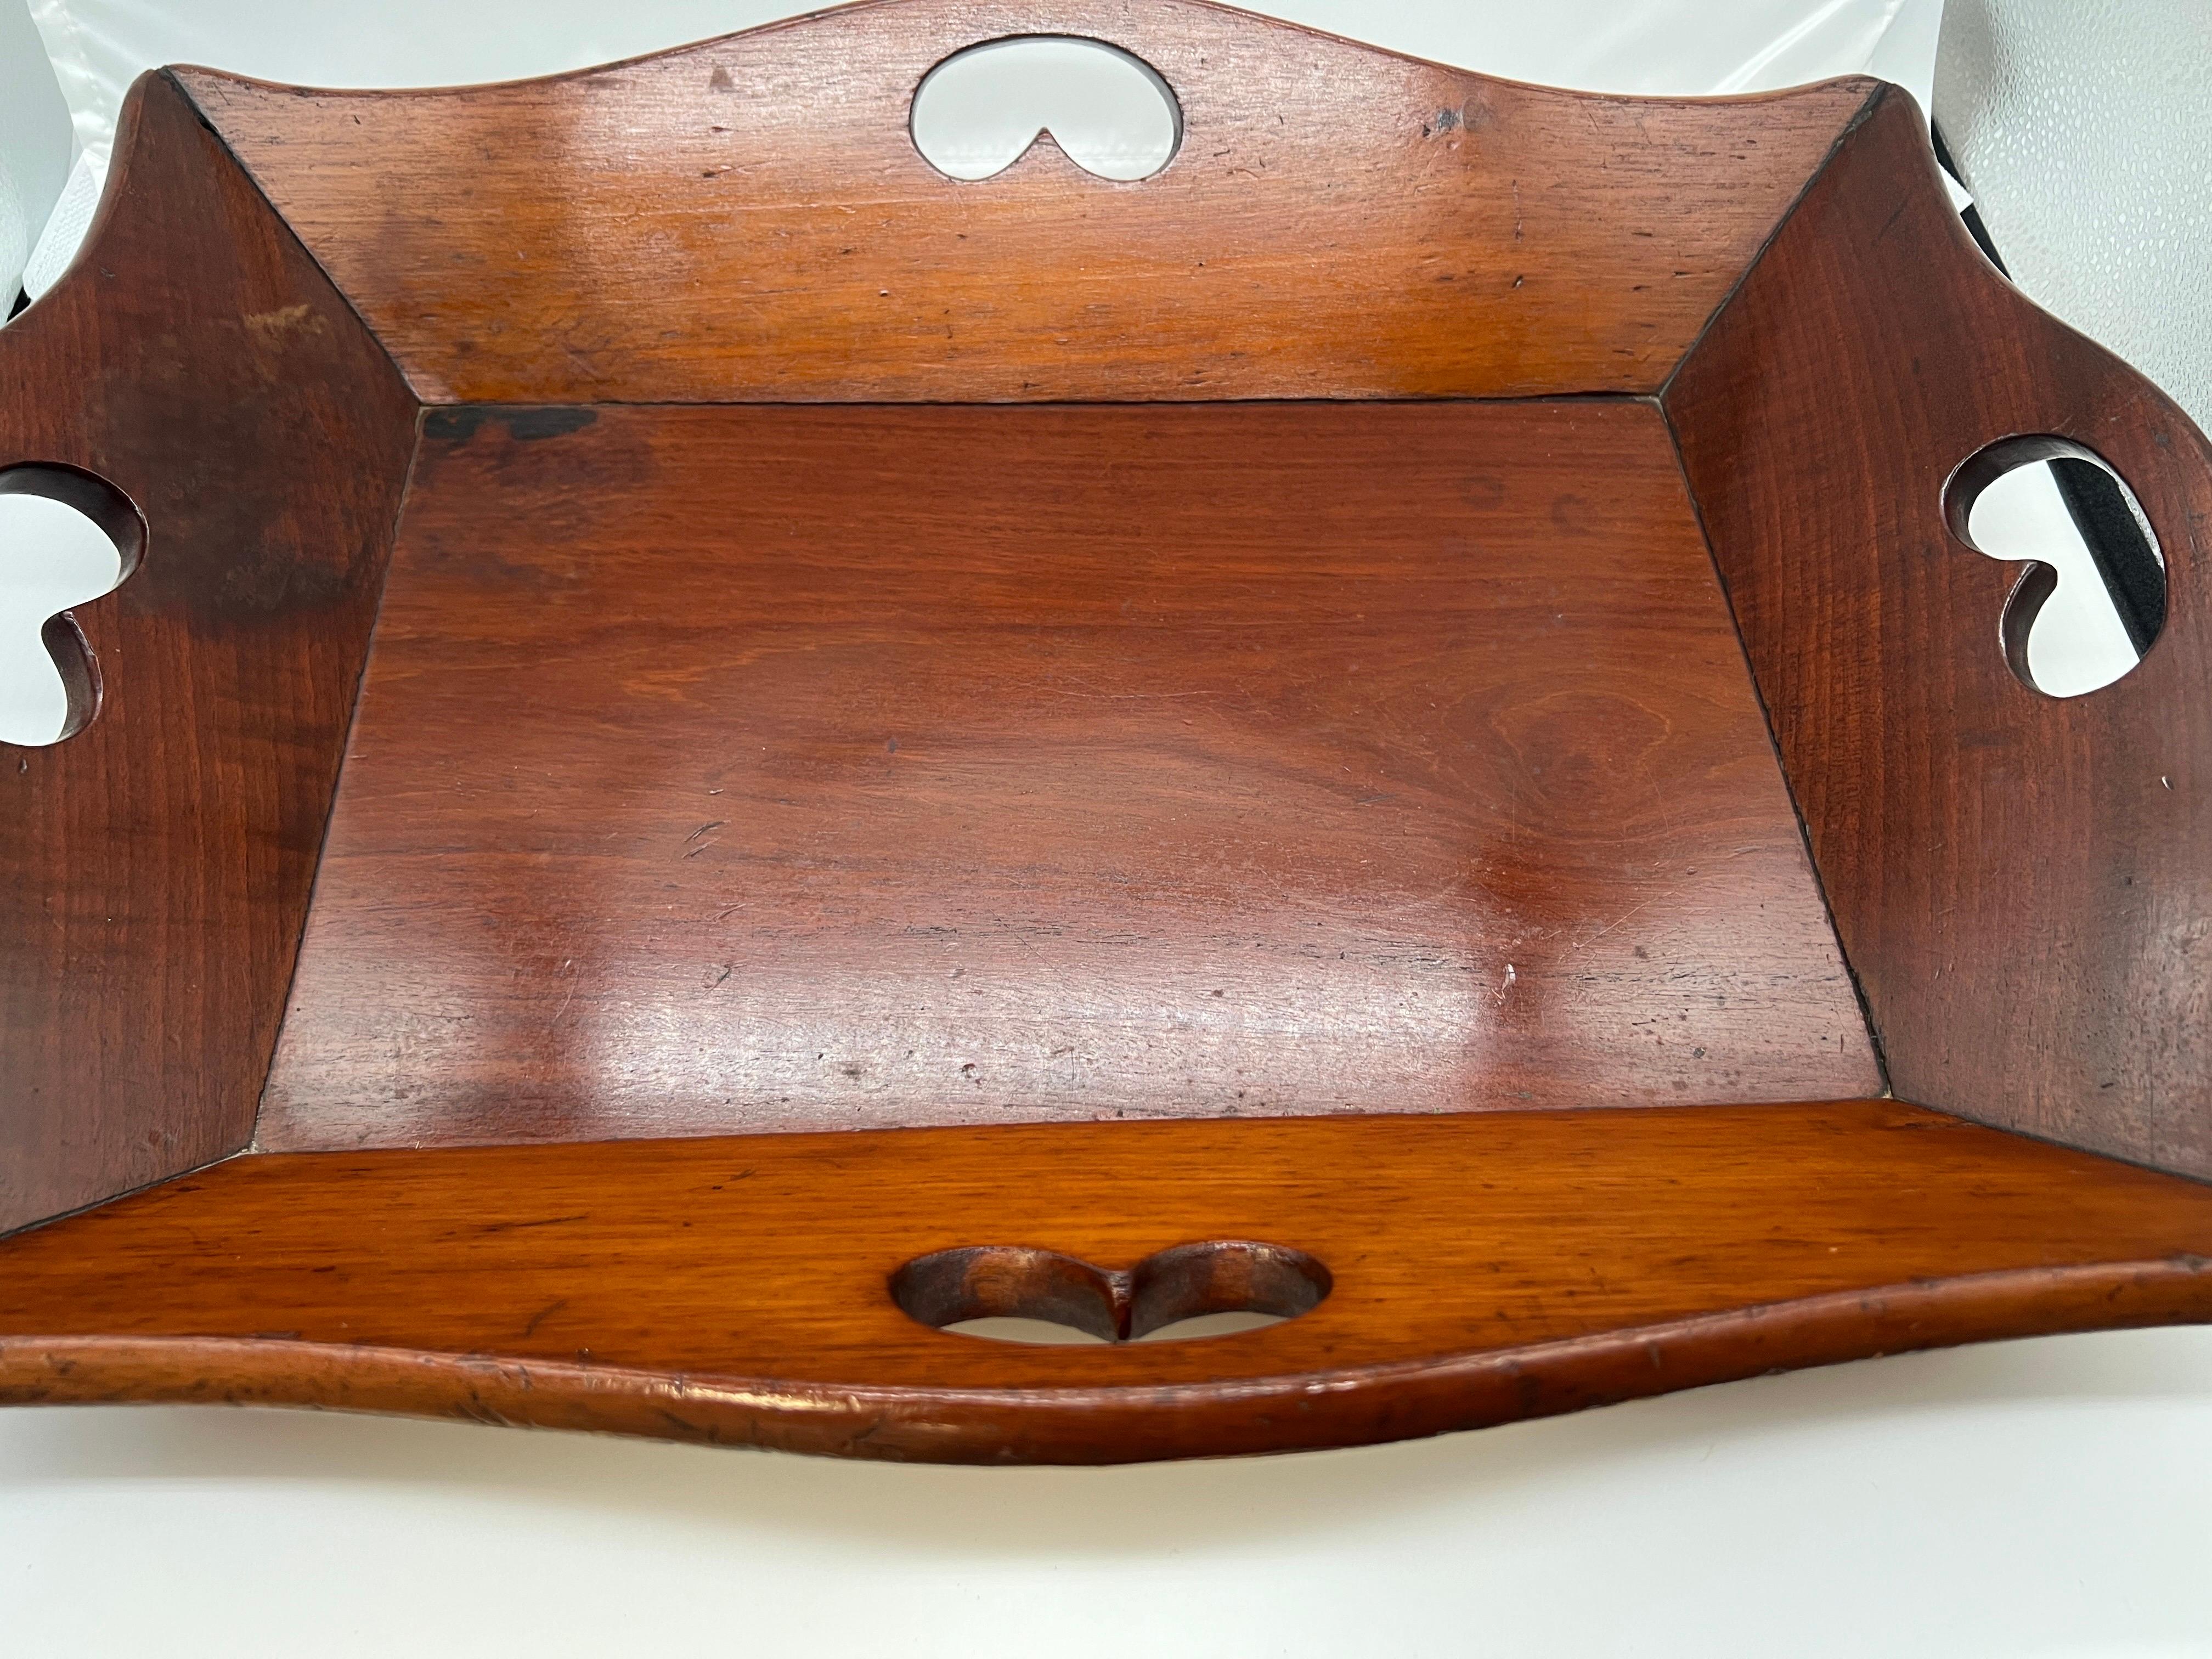 British Rare Form - George III Mahogany Butler's Tray W/ Beveled Handles C. 1790 For Sale